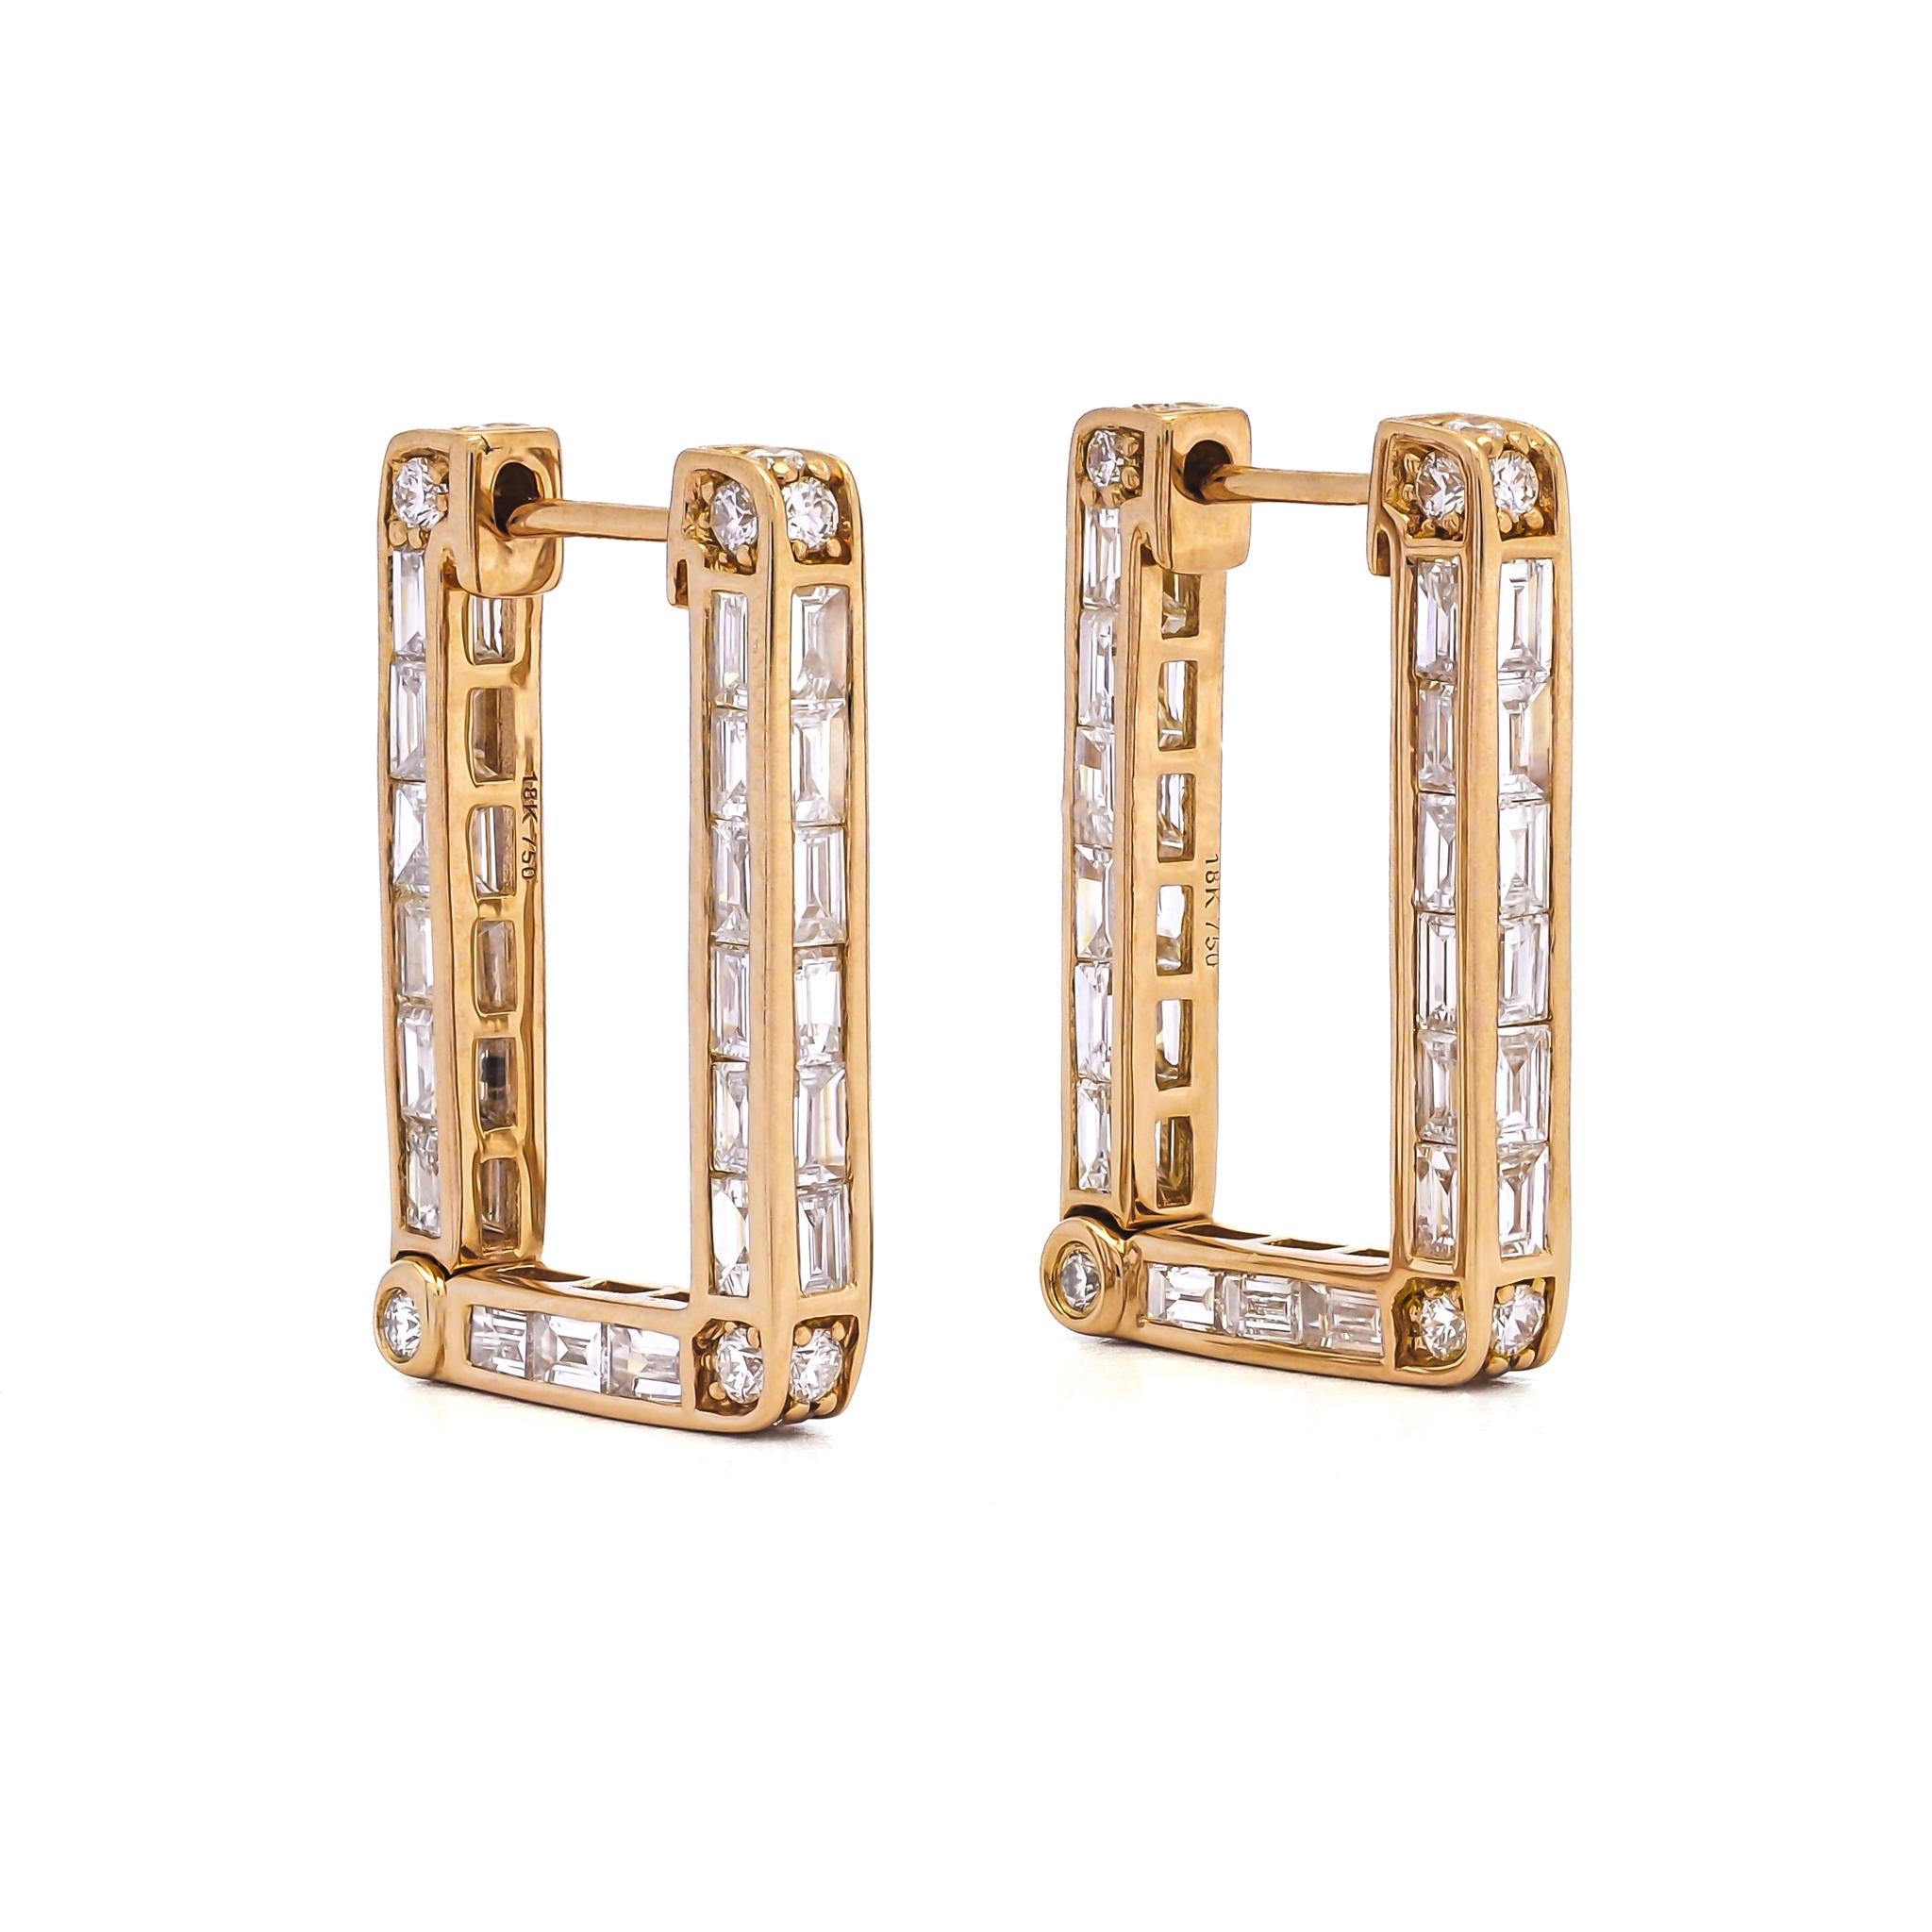 Exude elegance with our Inside Out Baguette Quad Hoop Earrings in 18K Rose Gold, adorned with a breathtaking 2.90 carats of exquisite baguette-cut diamonds. Meticulously crafted to perfection, the diamonds sparkle and shimmer from every angle,